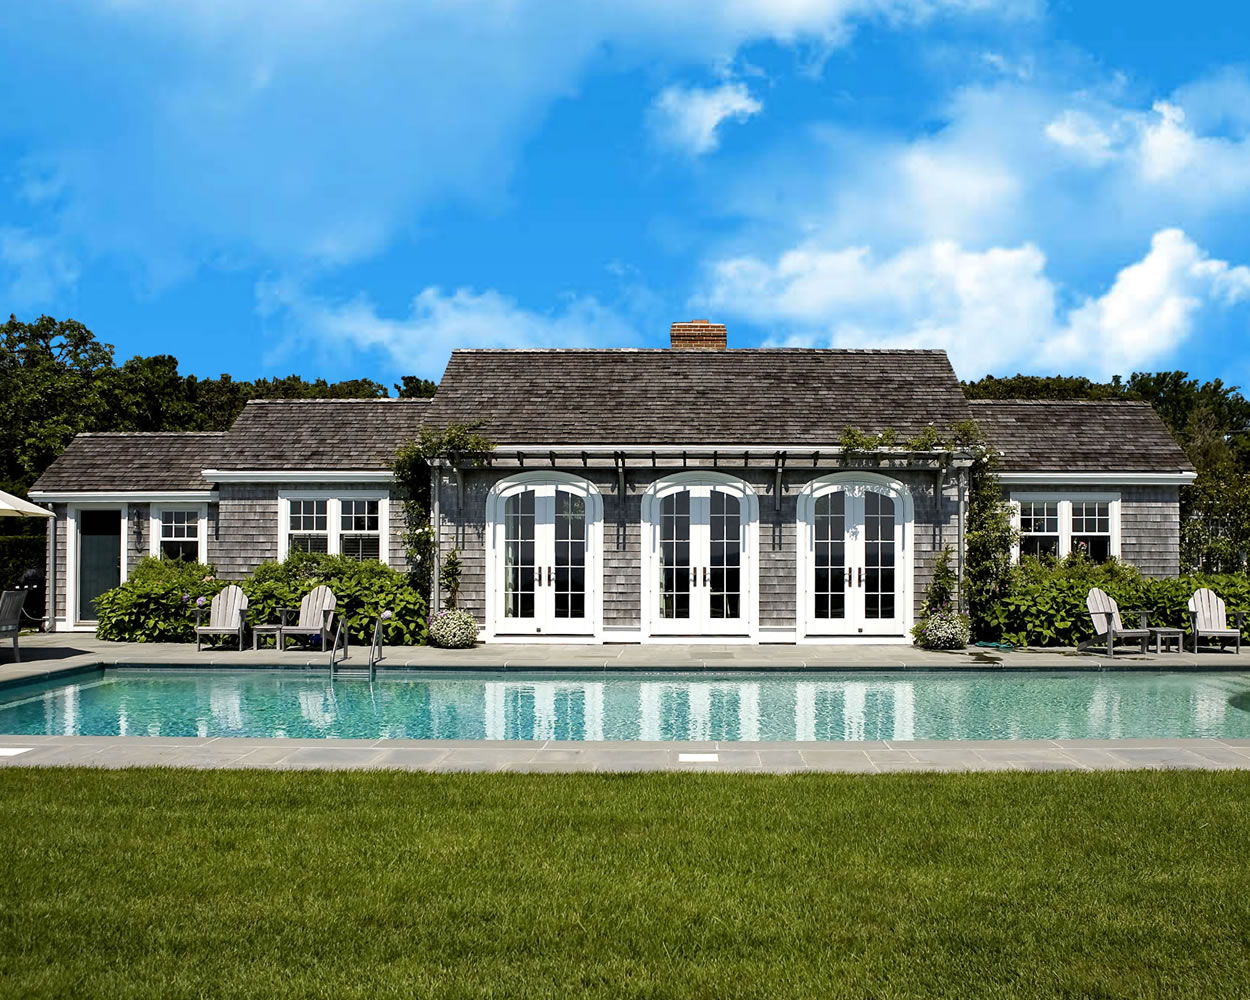 Rogers & Marney | Cape Cod's Custom Home Builder